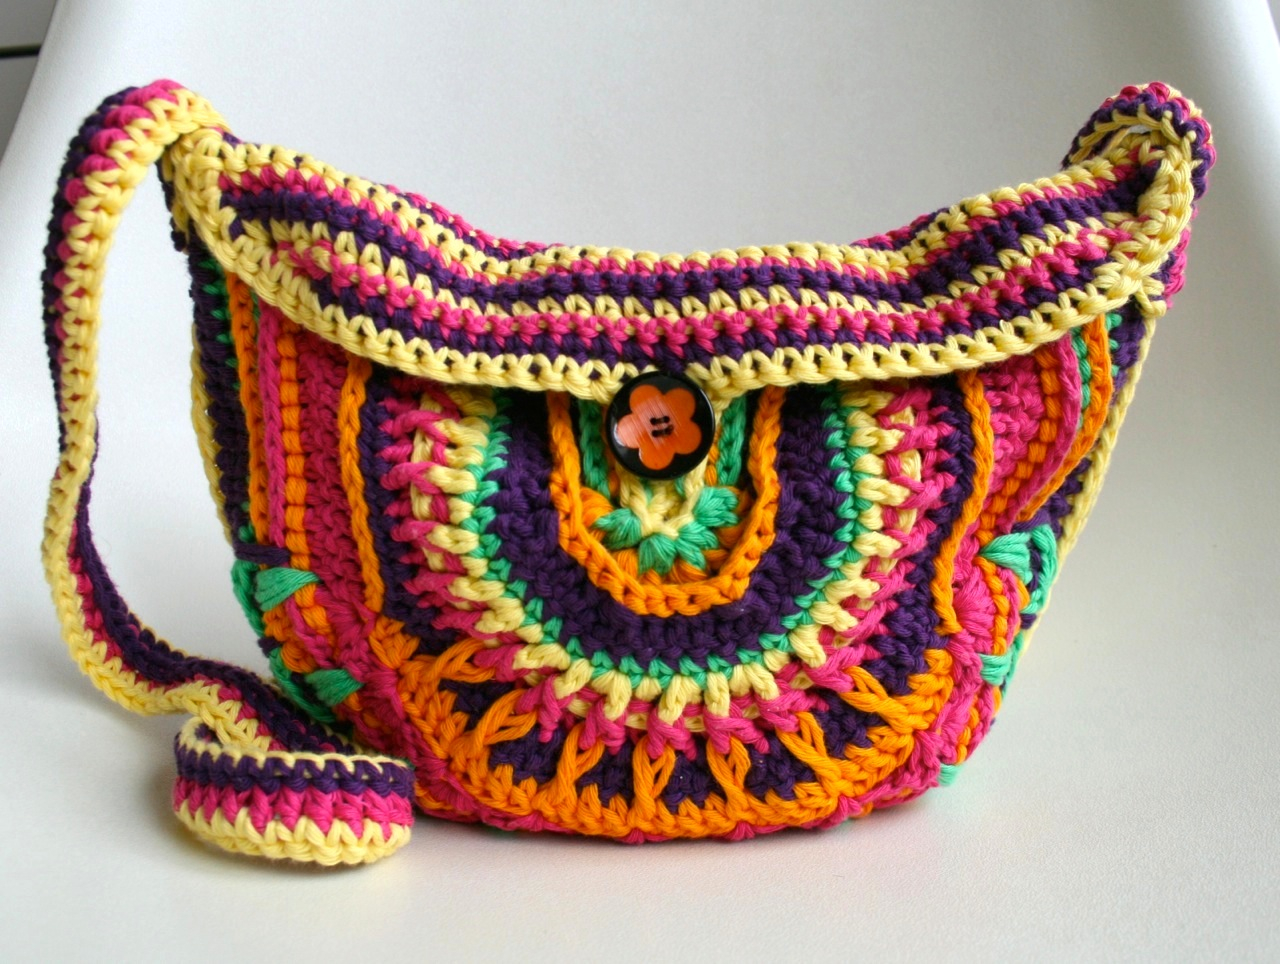 Crochet Purse Patterns New Boho Crochet Purse Pattern And A New Collection Of Bags